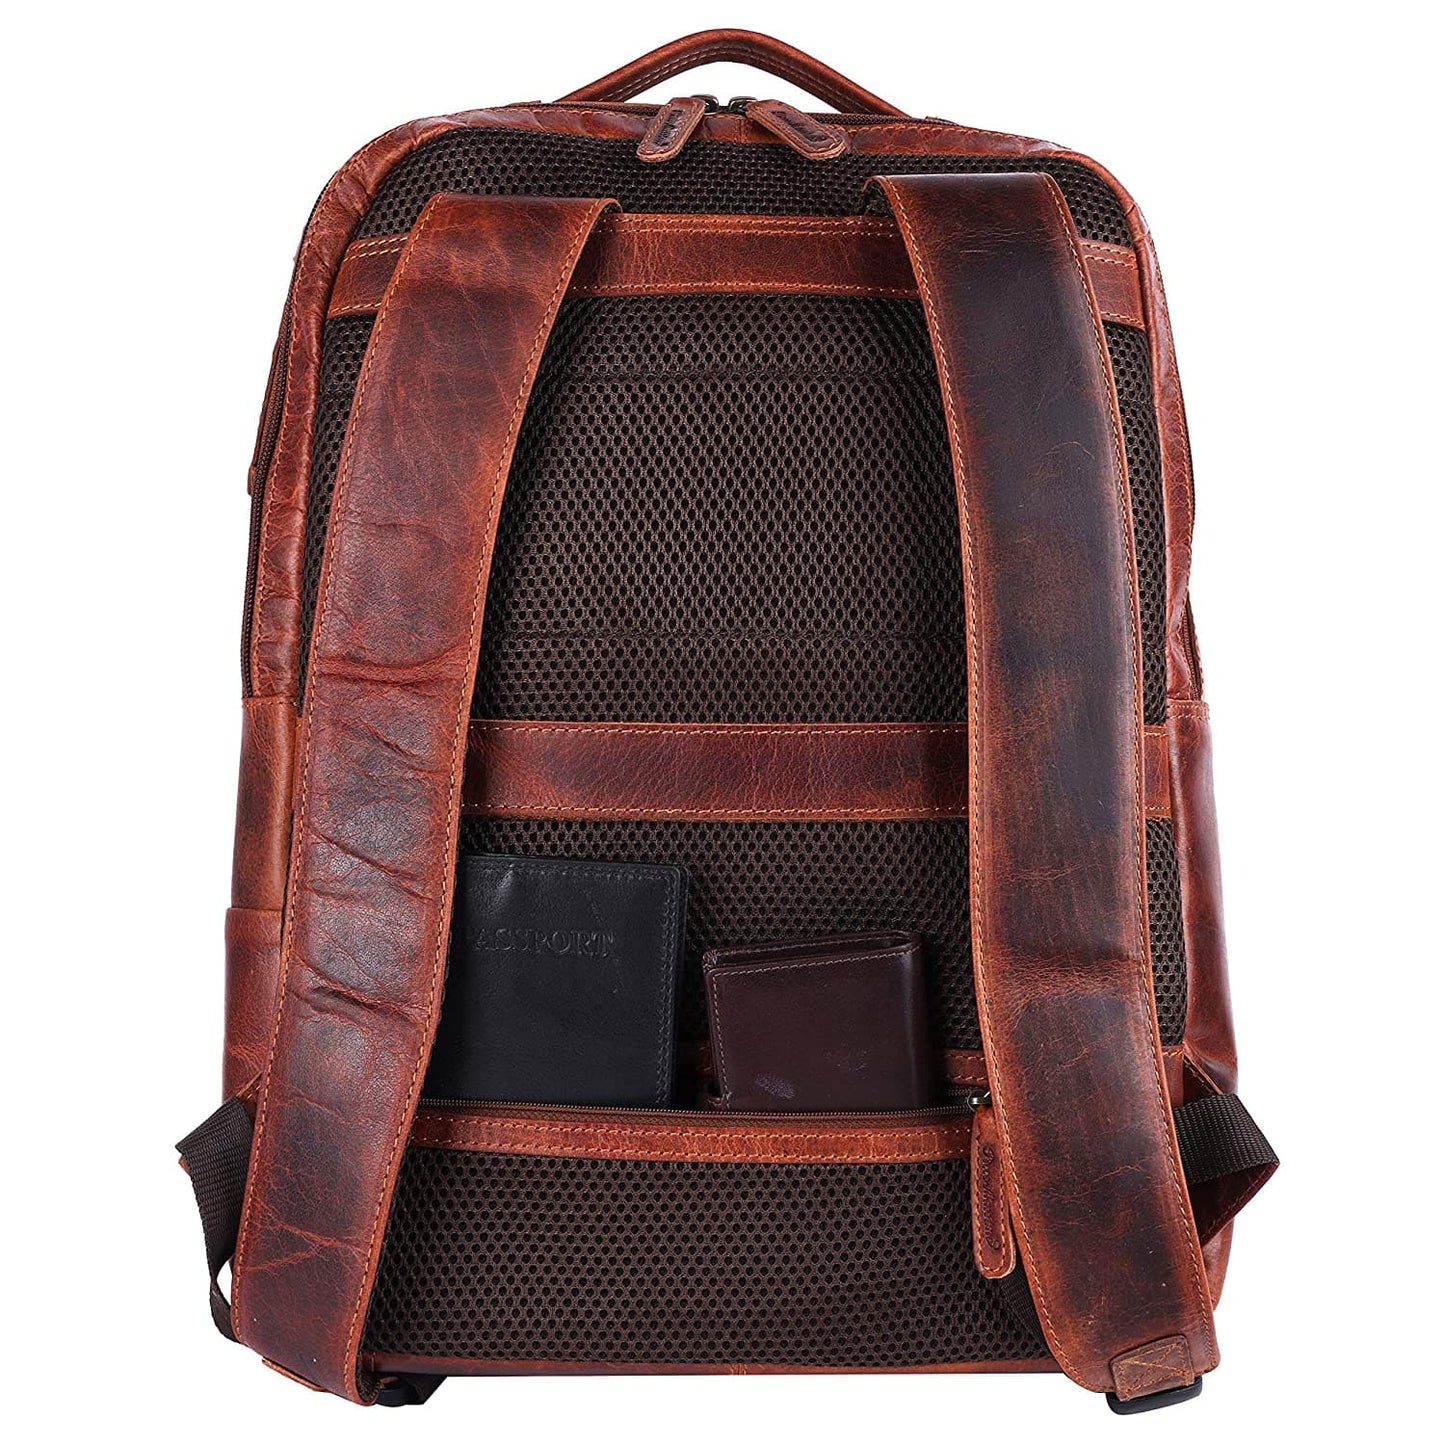 Premium Leather Work Casual Laptop Backpacks Ample Storage Features Padded Back Panel Multiple Pocket Sleeves